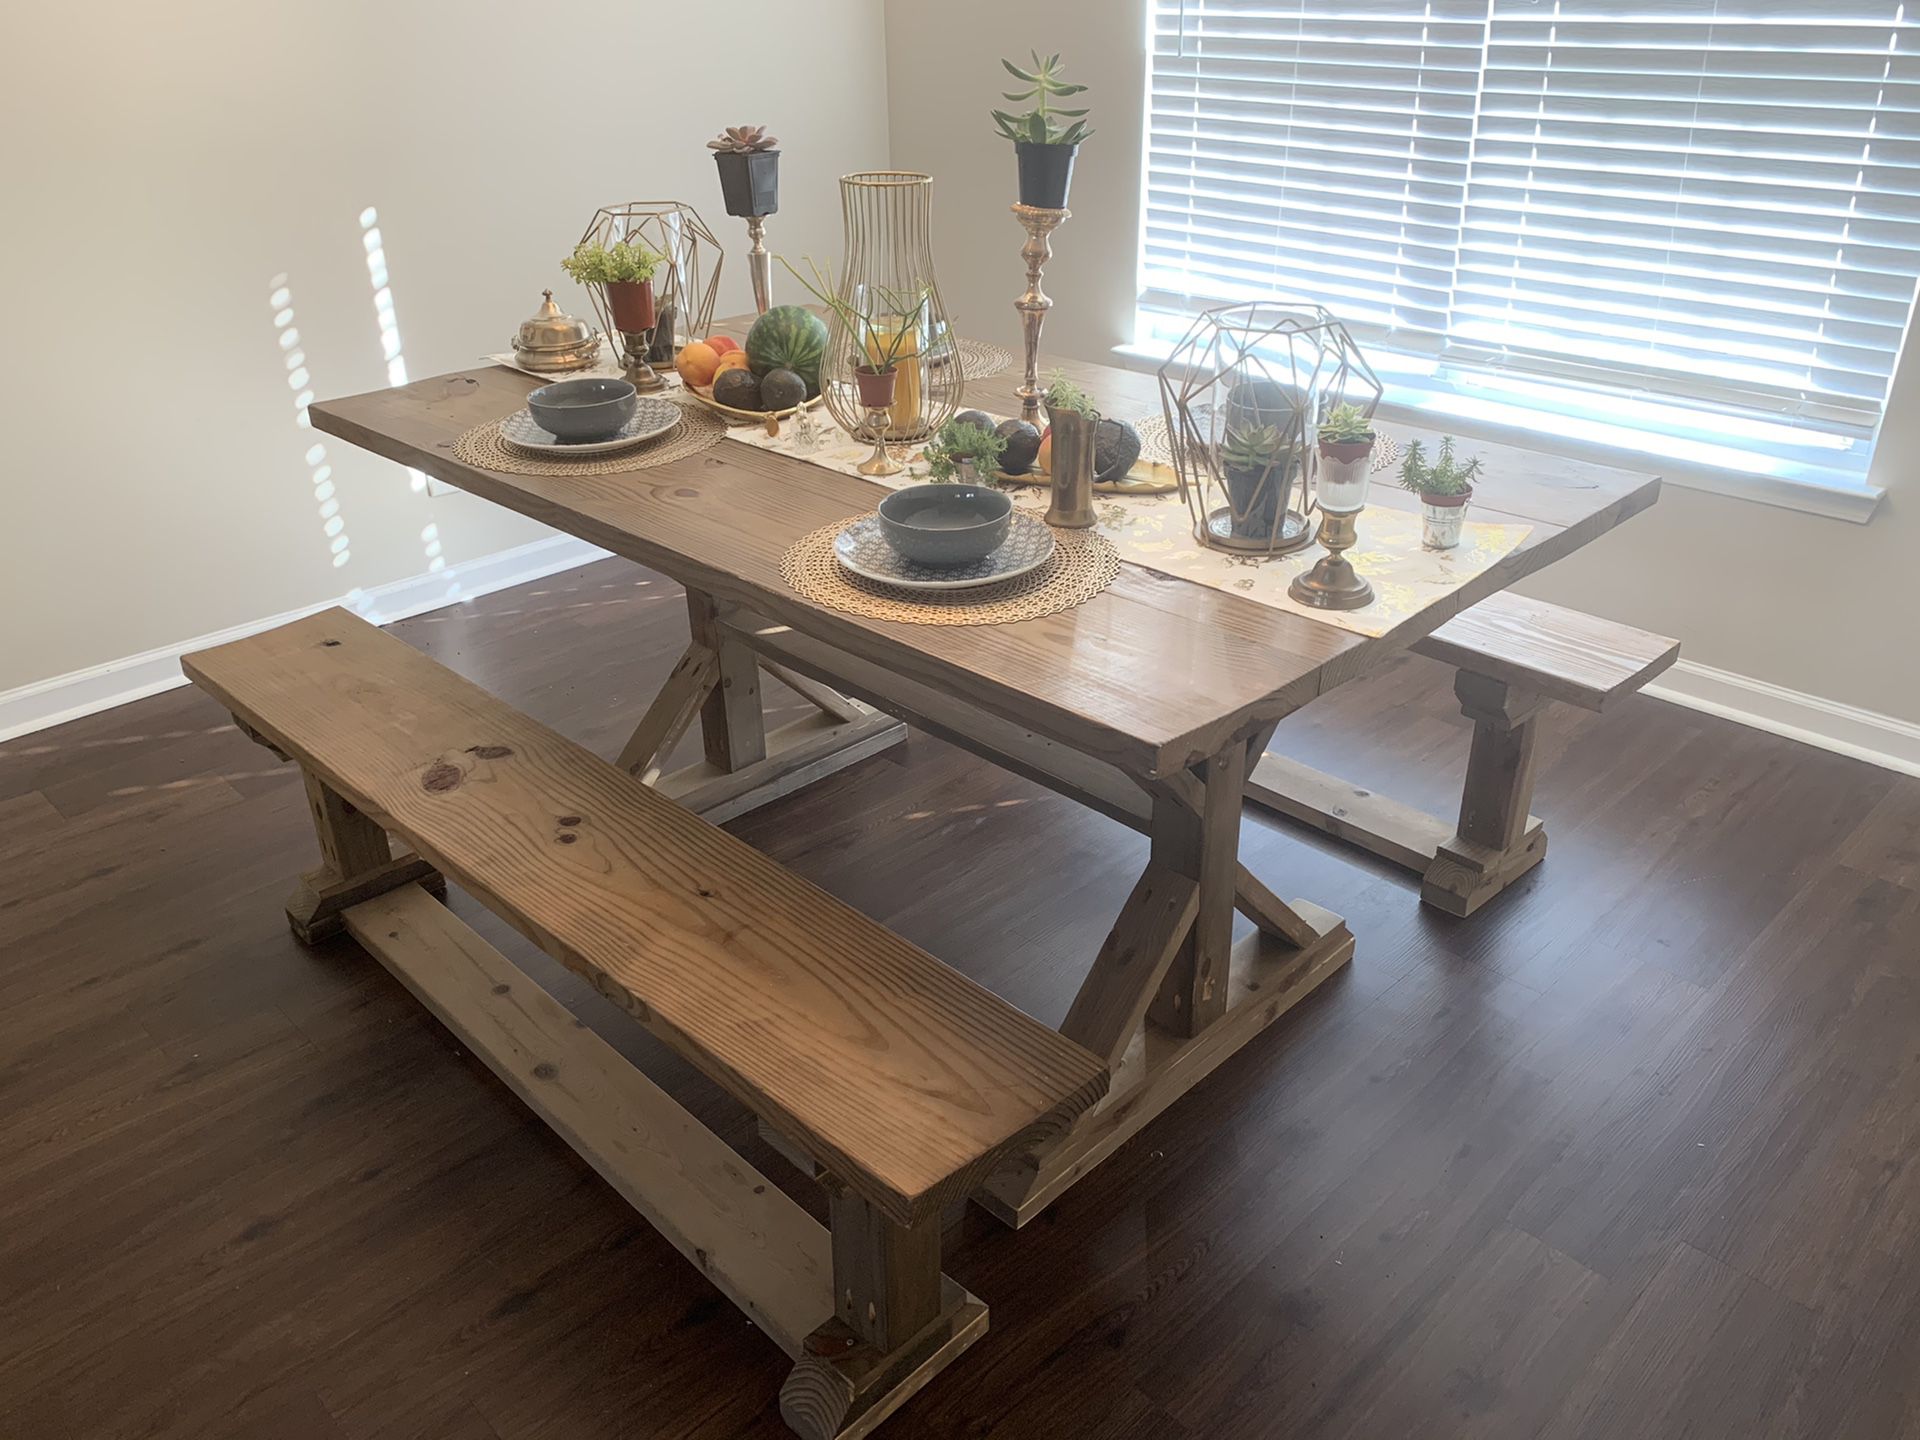 Hand made all wood picnic dining table